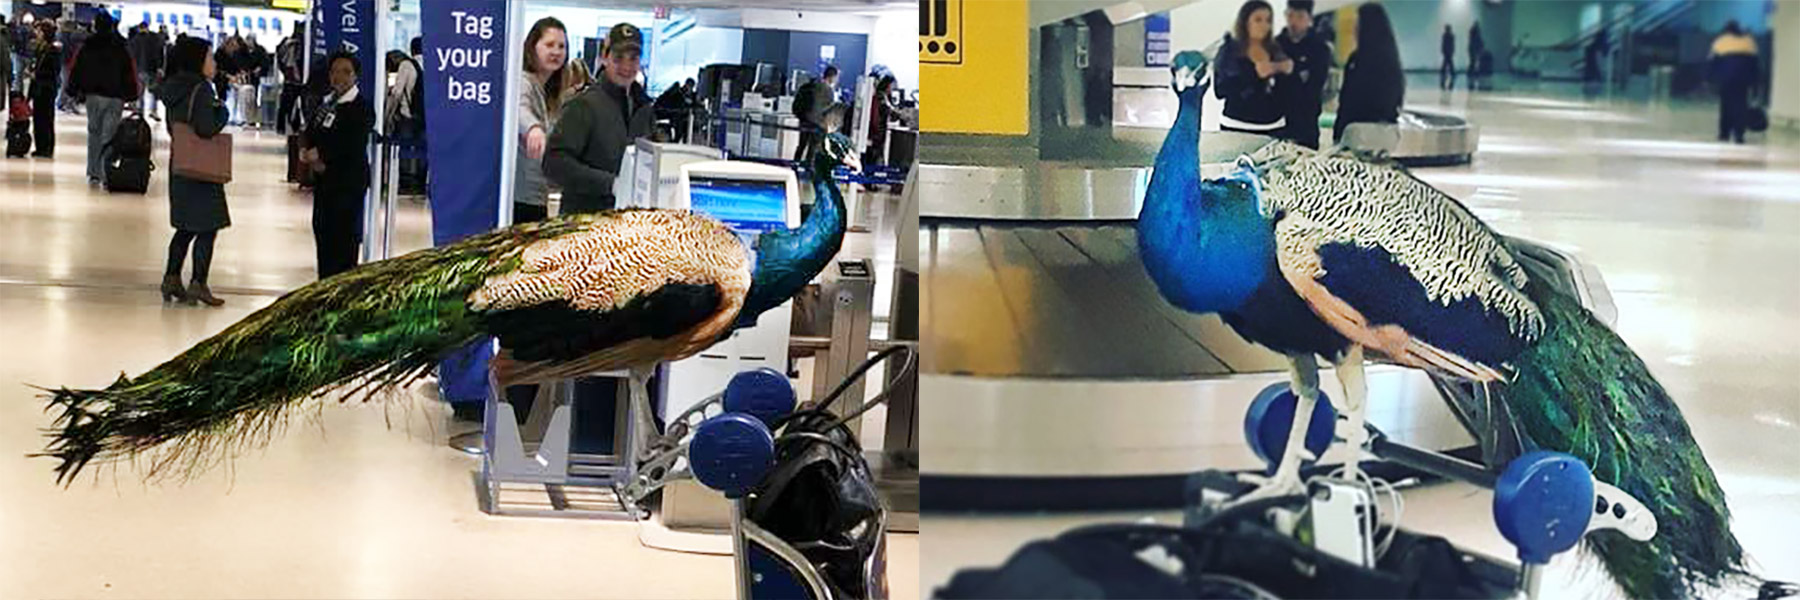 The Emotional Support Peacock Banned From Airplane Has Instagram 5718